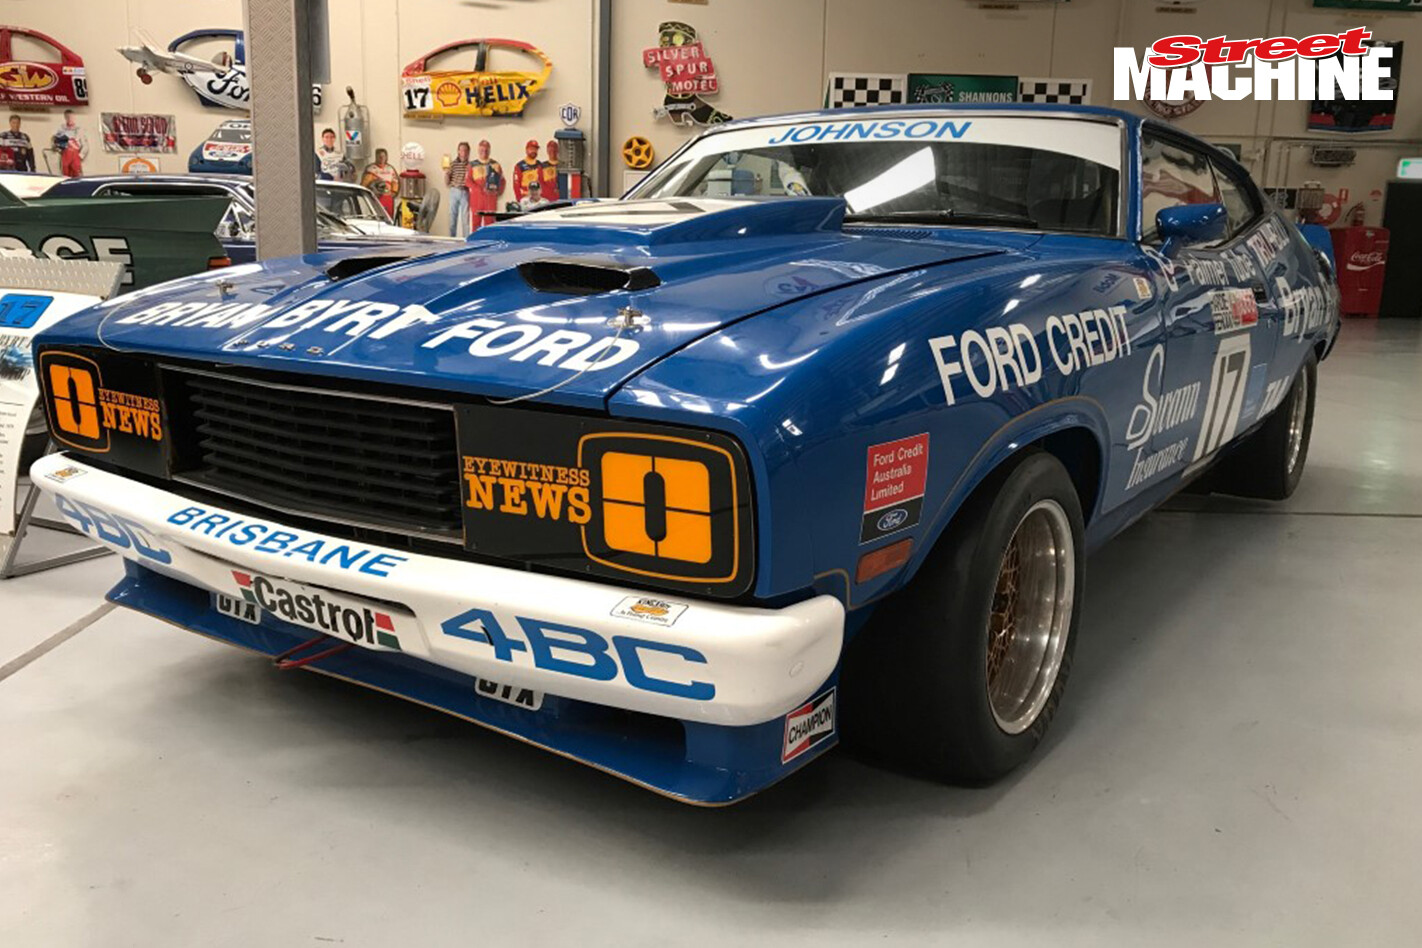 Dick Johnson XC Falcon hardtop racer up for auction – video